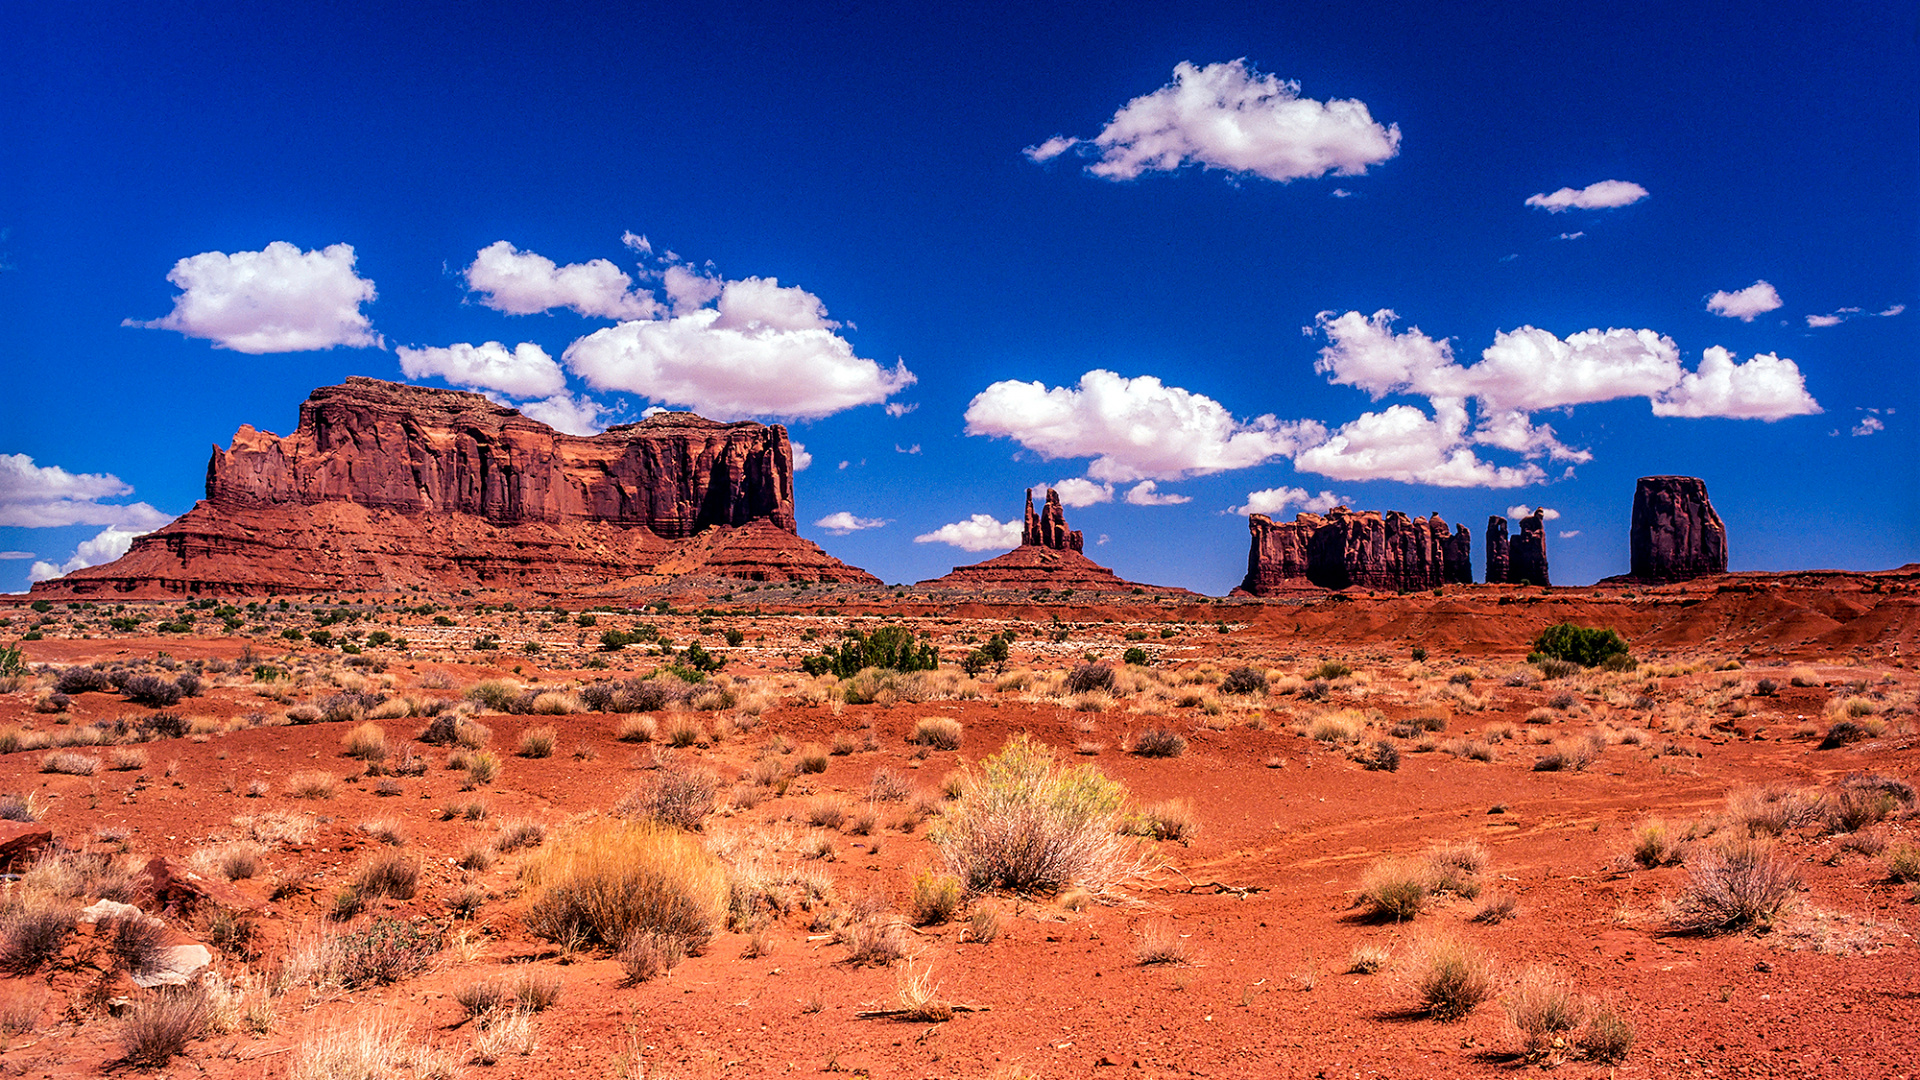 Brown Rock Formation Under Blue Sky During Daytime. Wallpaper in 1920x1080 Resolution